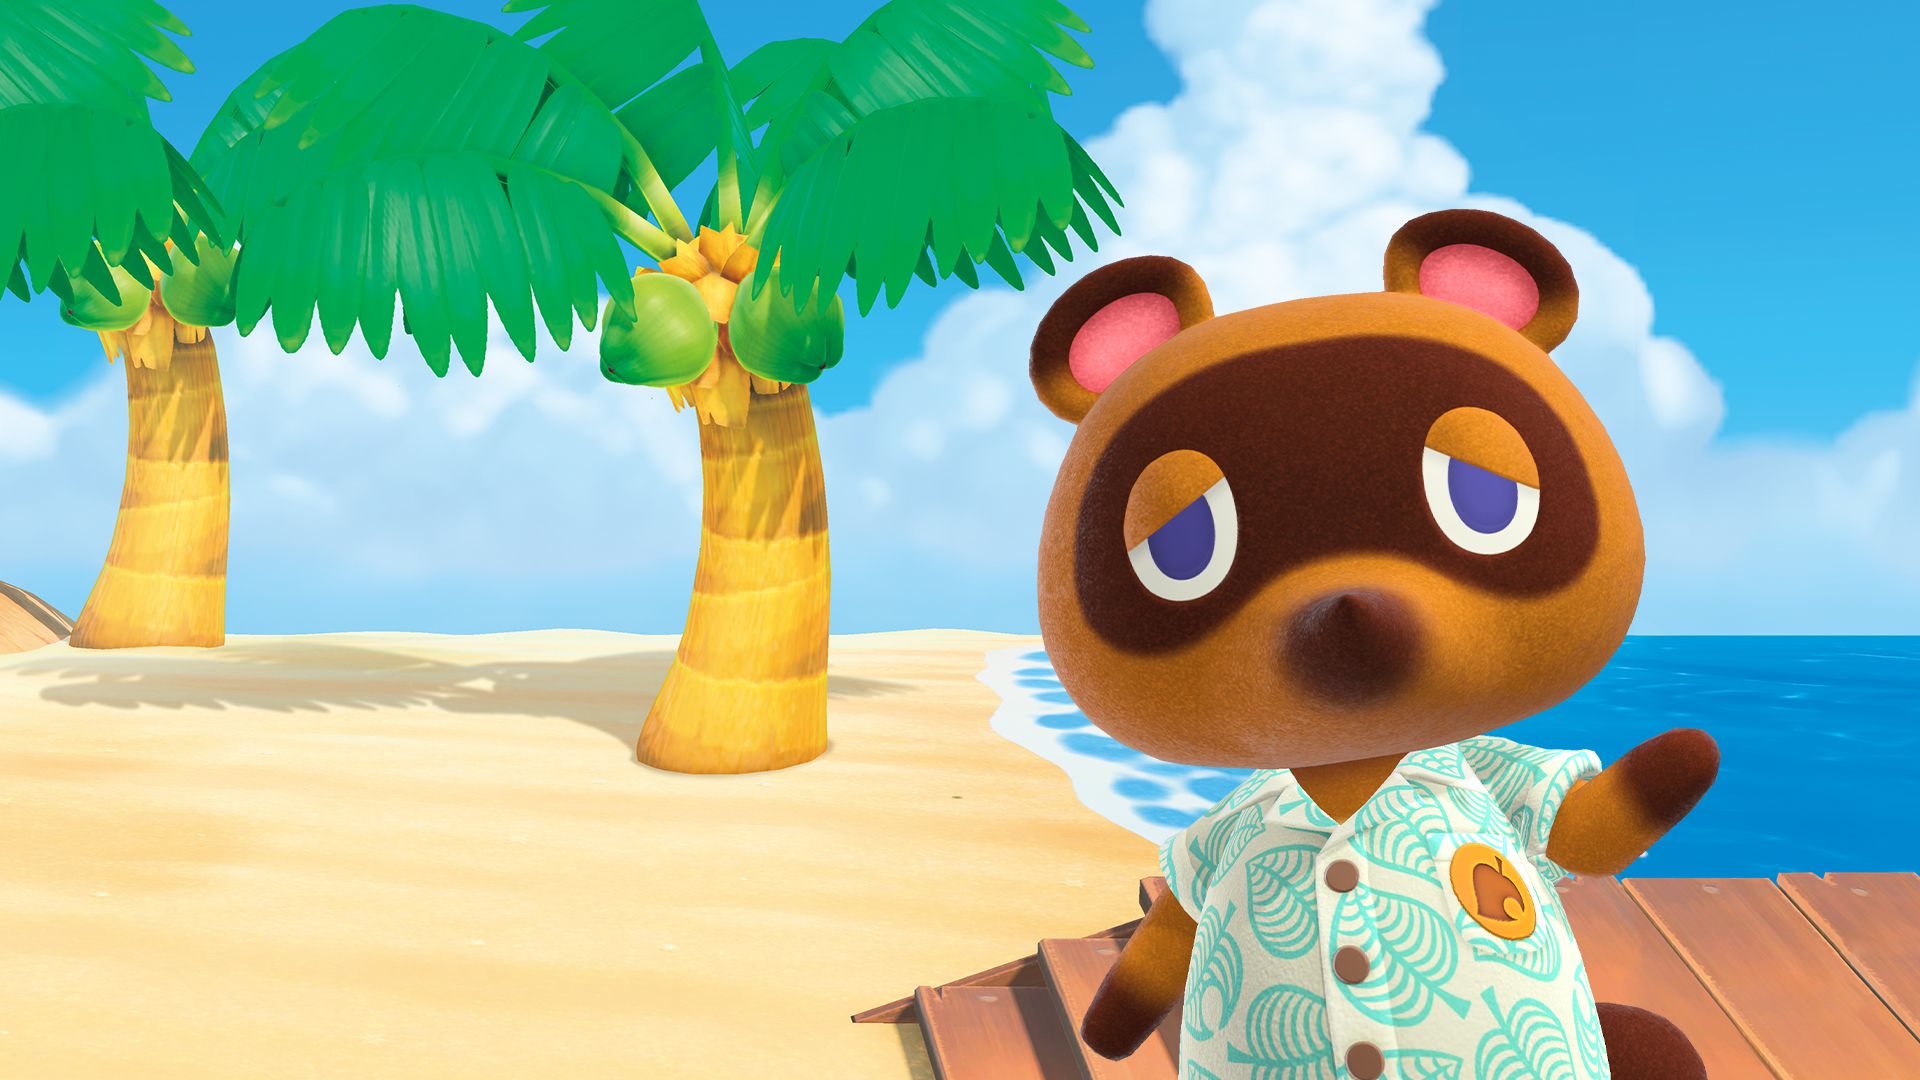 Animal Crossing: New Horizons players will be getting a little